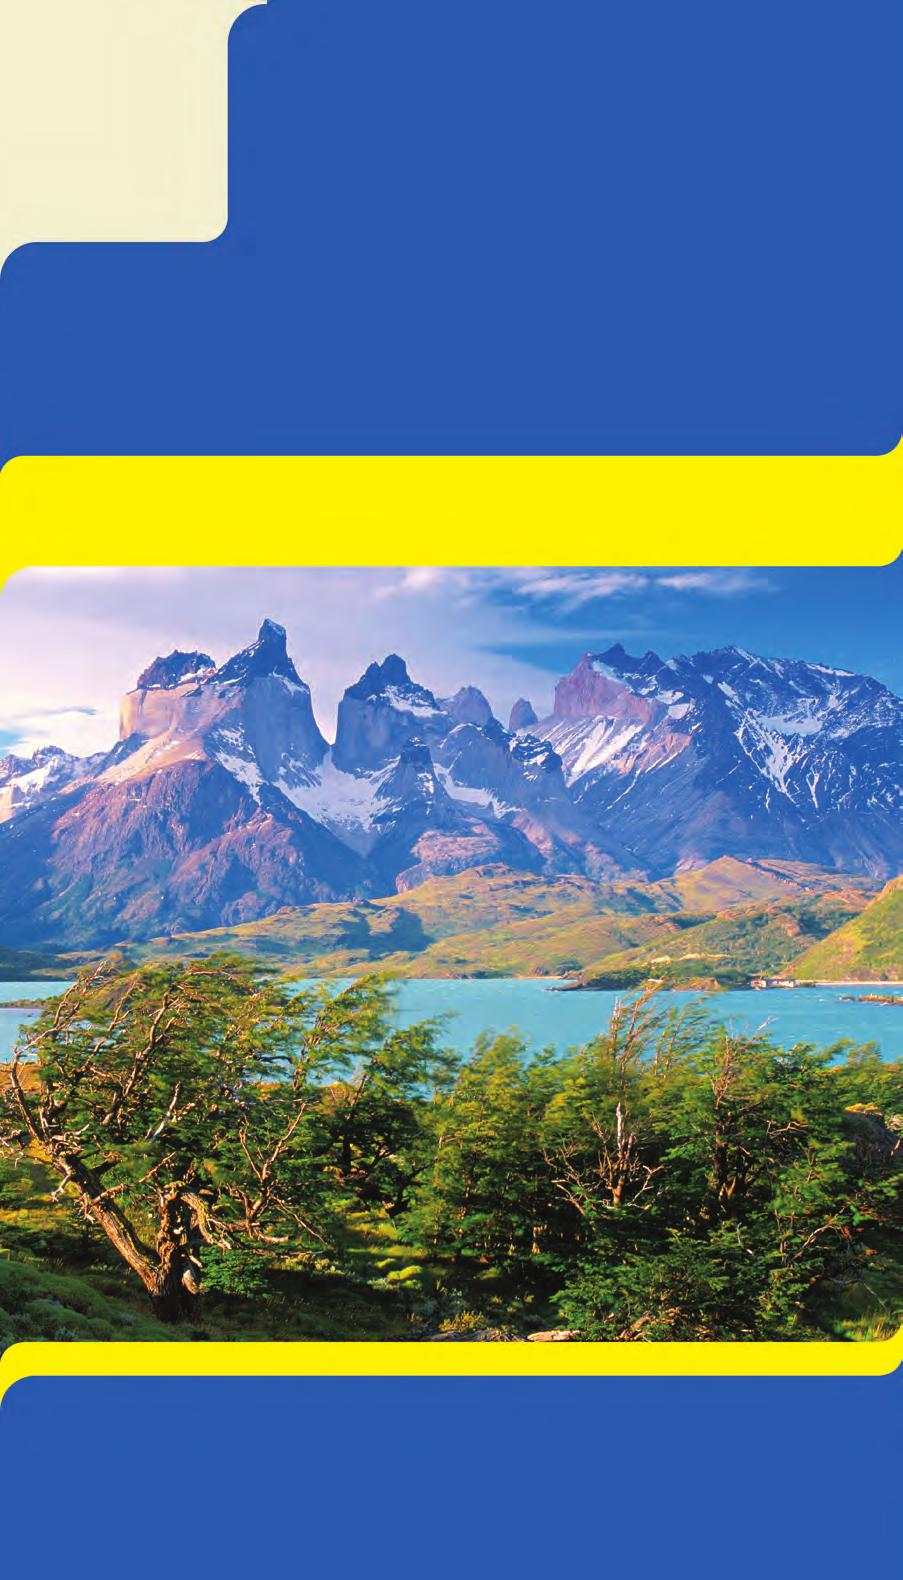 PATAGONIAN FRONTIERS Argentina and Chile by Land & Sea January 29-February 15, 2016 18 days from $7,169 total price from Miami ($6,395 air, land & cruise inclusive plus $774 airline taxes and